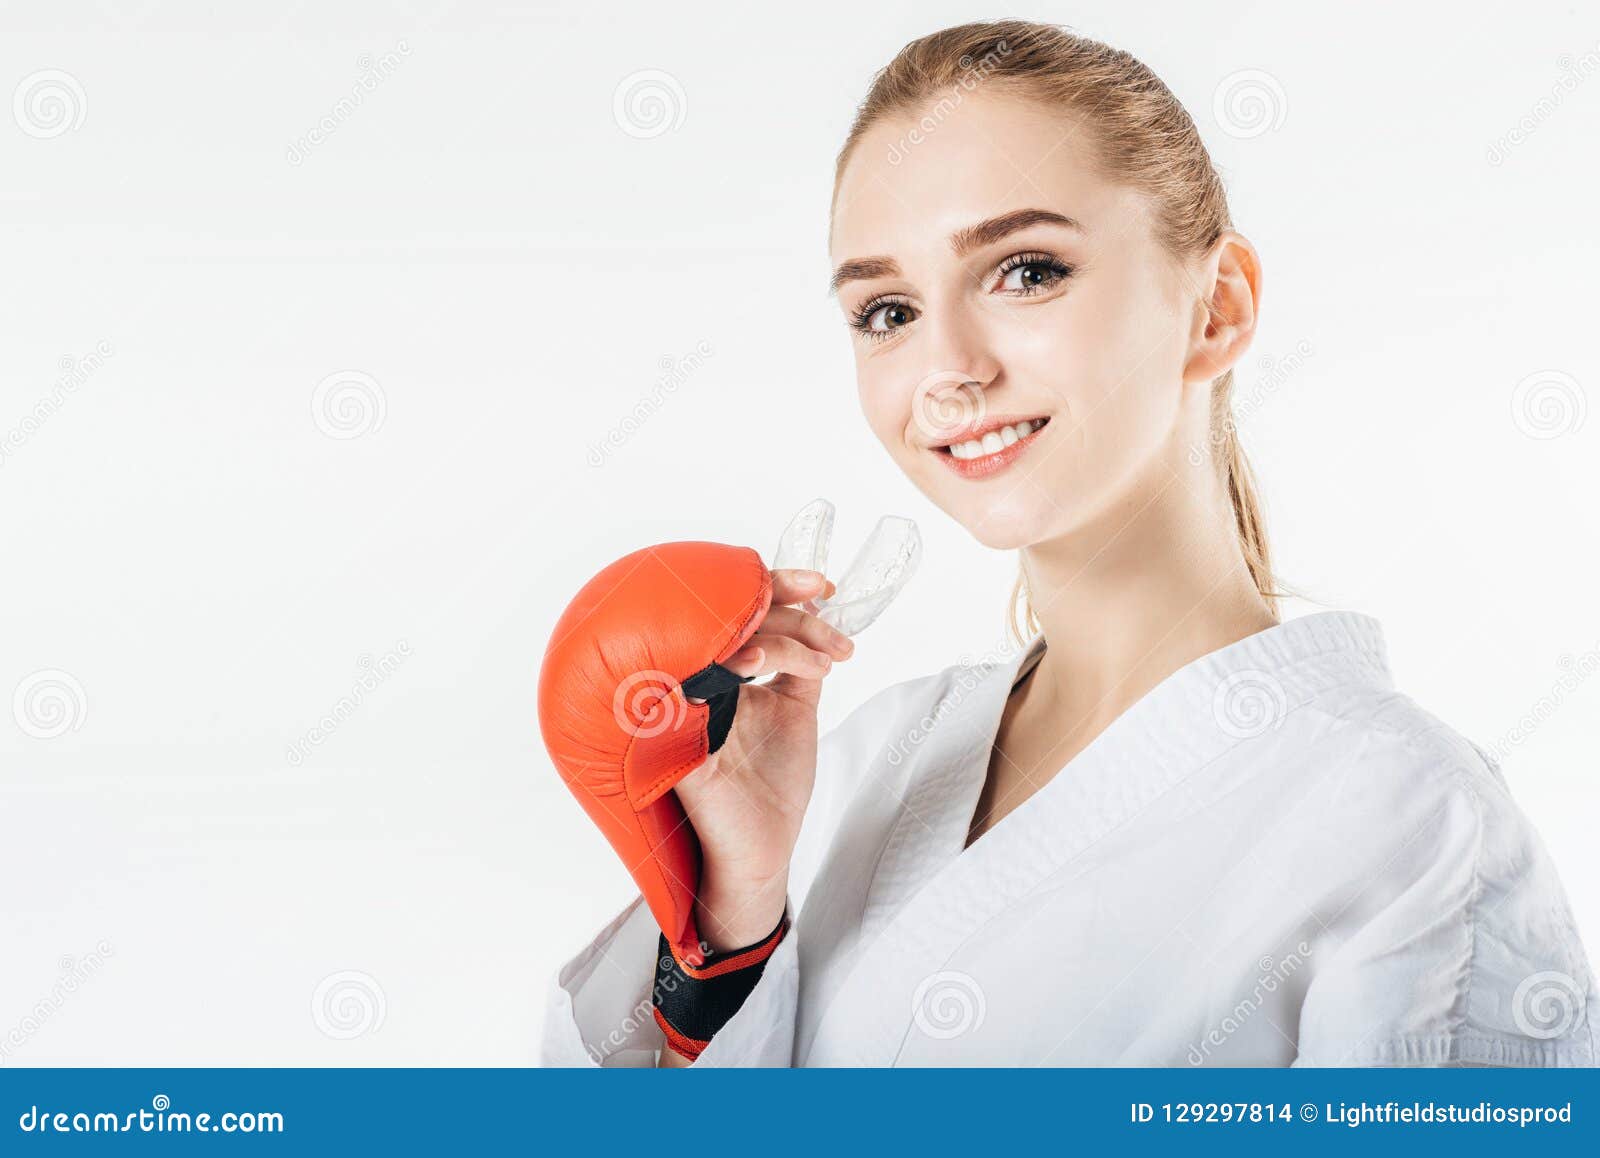 smiling female karate fighter holding mouthguard